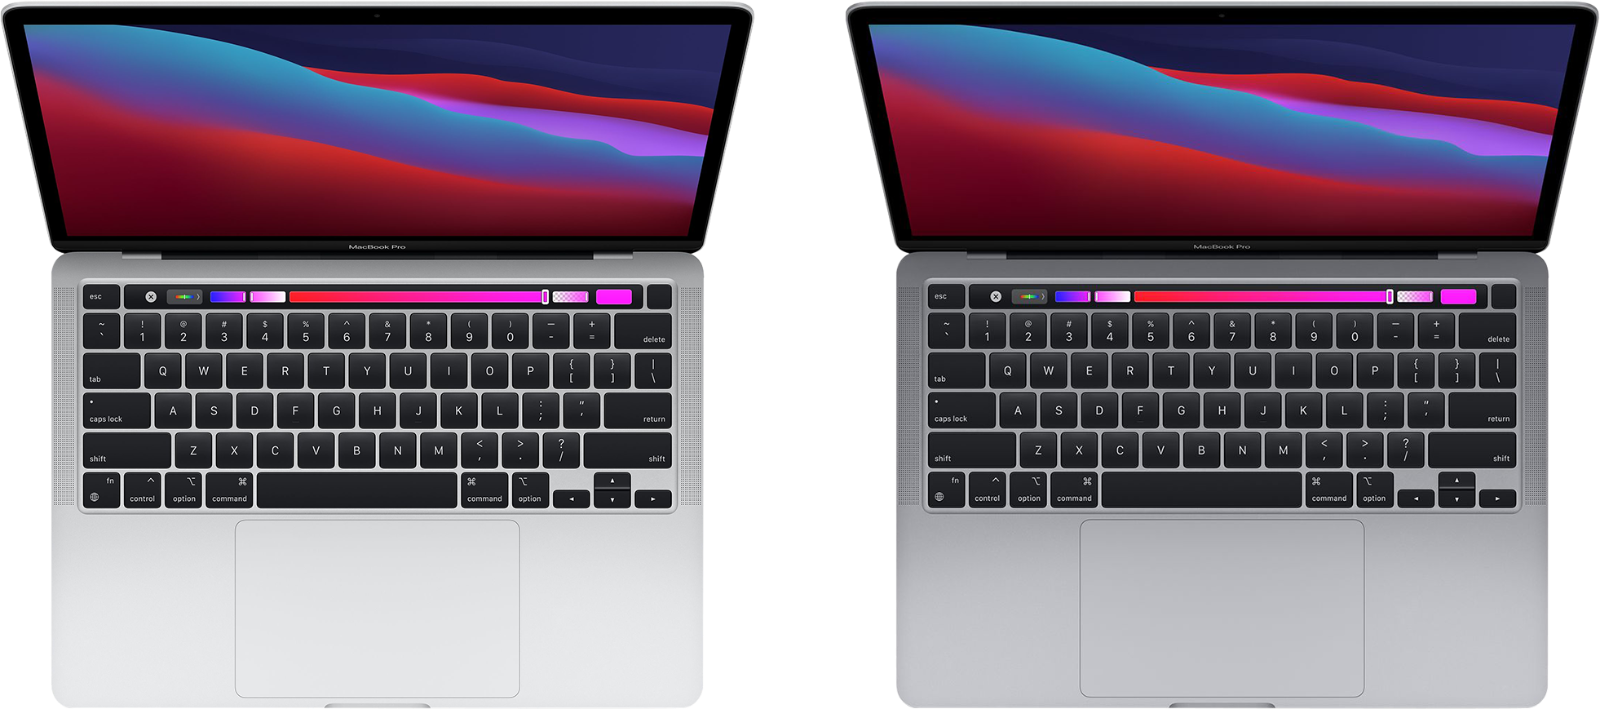 MacBook Pro (13-inch, M1, 2020) Technical Specifications